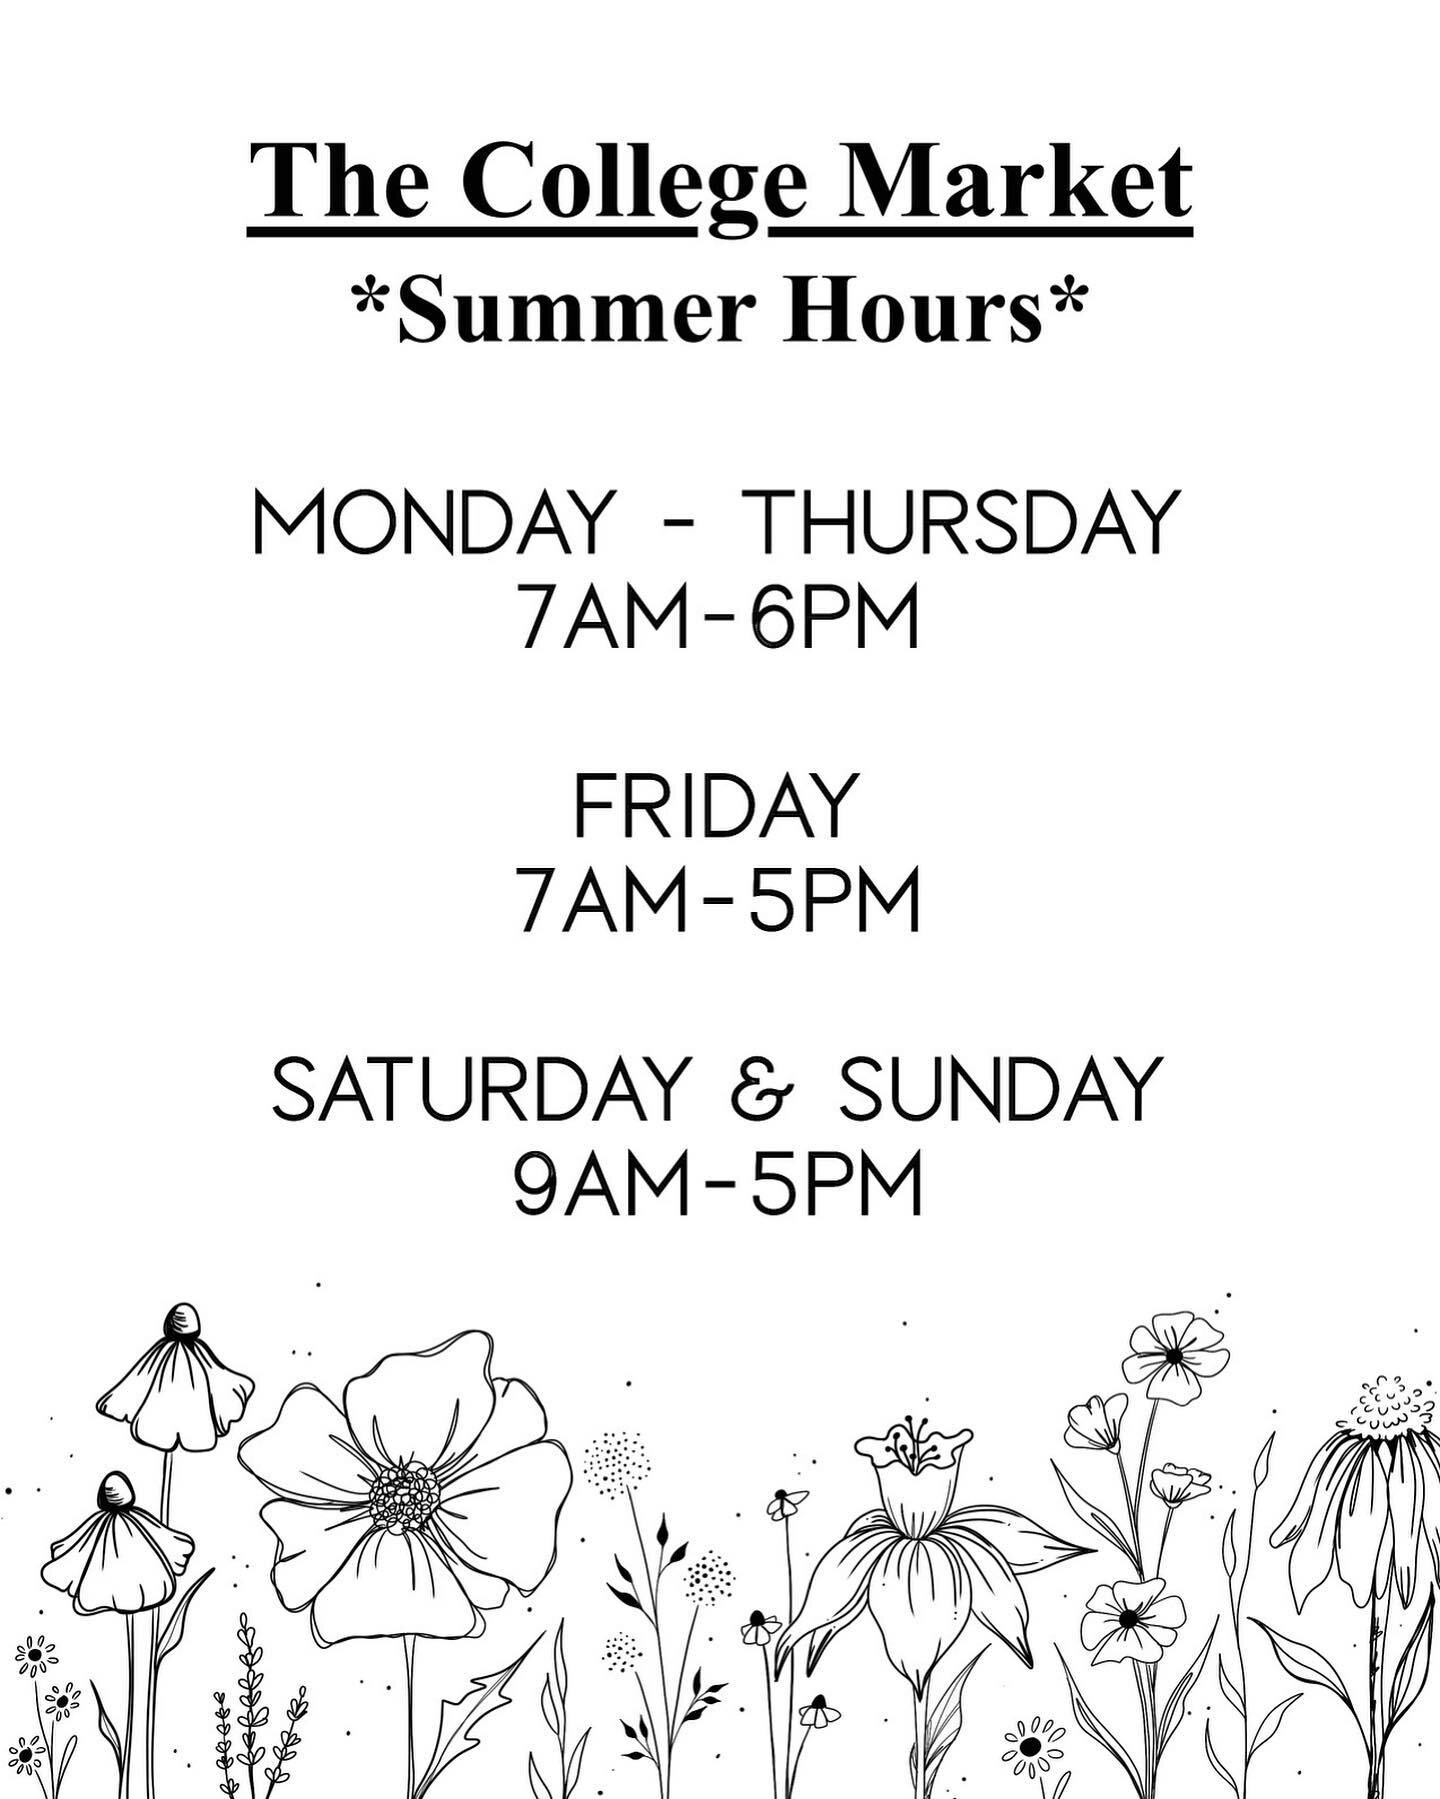 Just a reminder our summer hours begin today!!!
🌻🌞🌸💐🌈